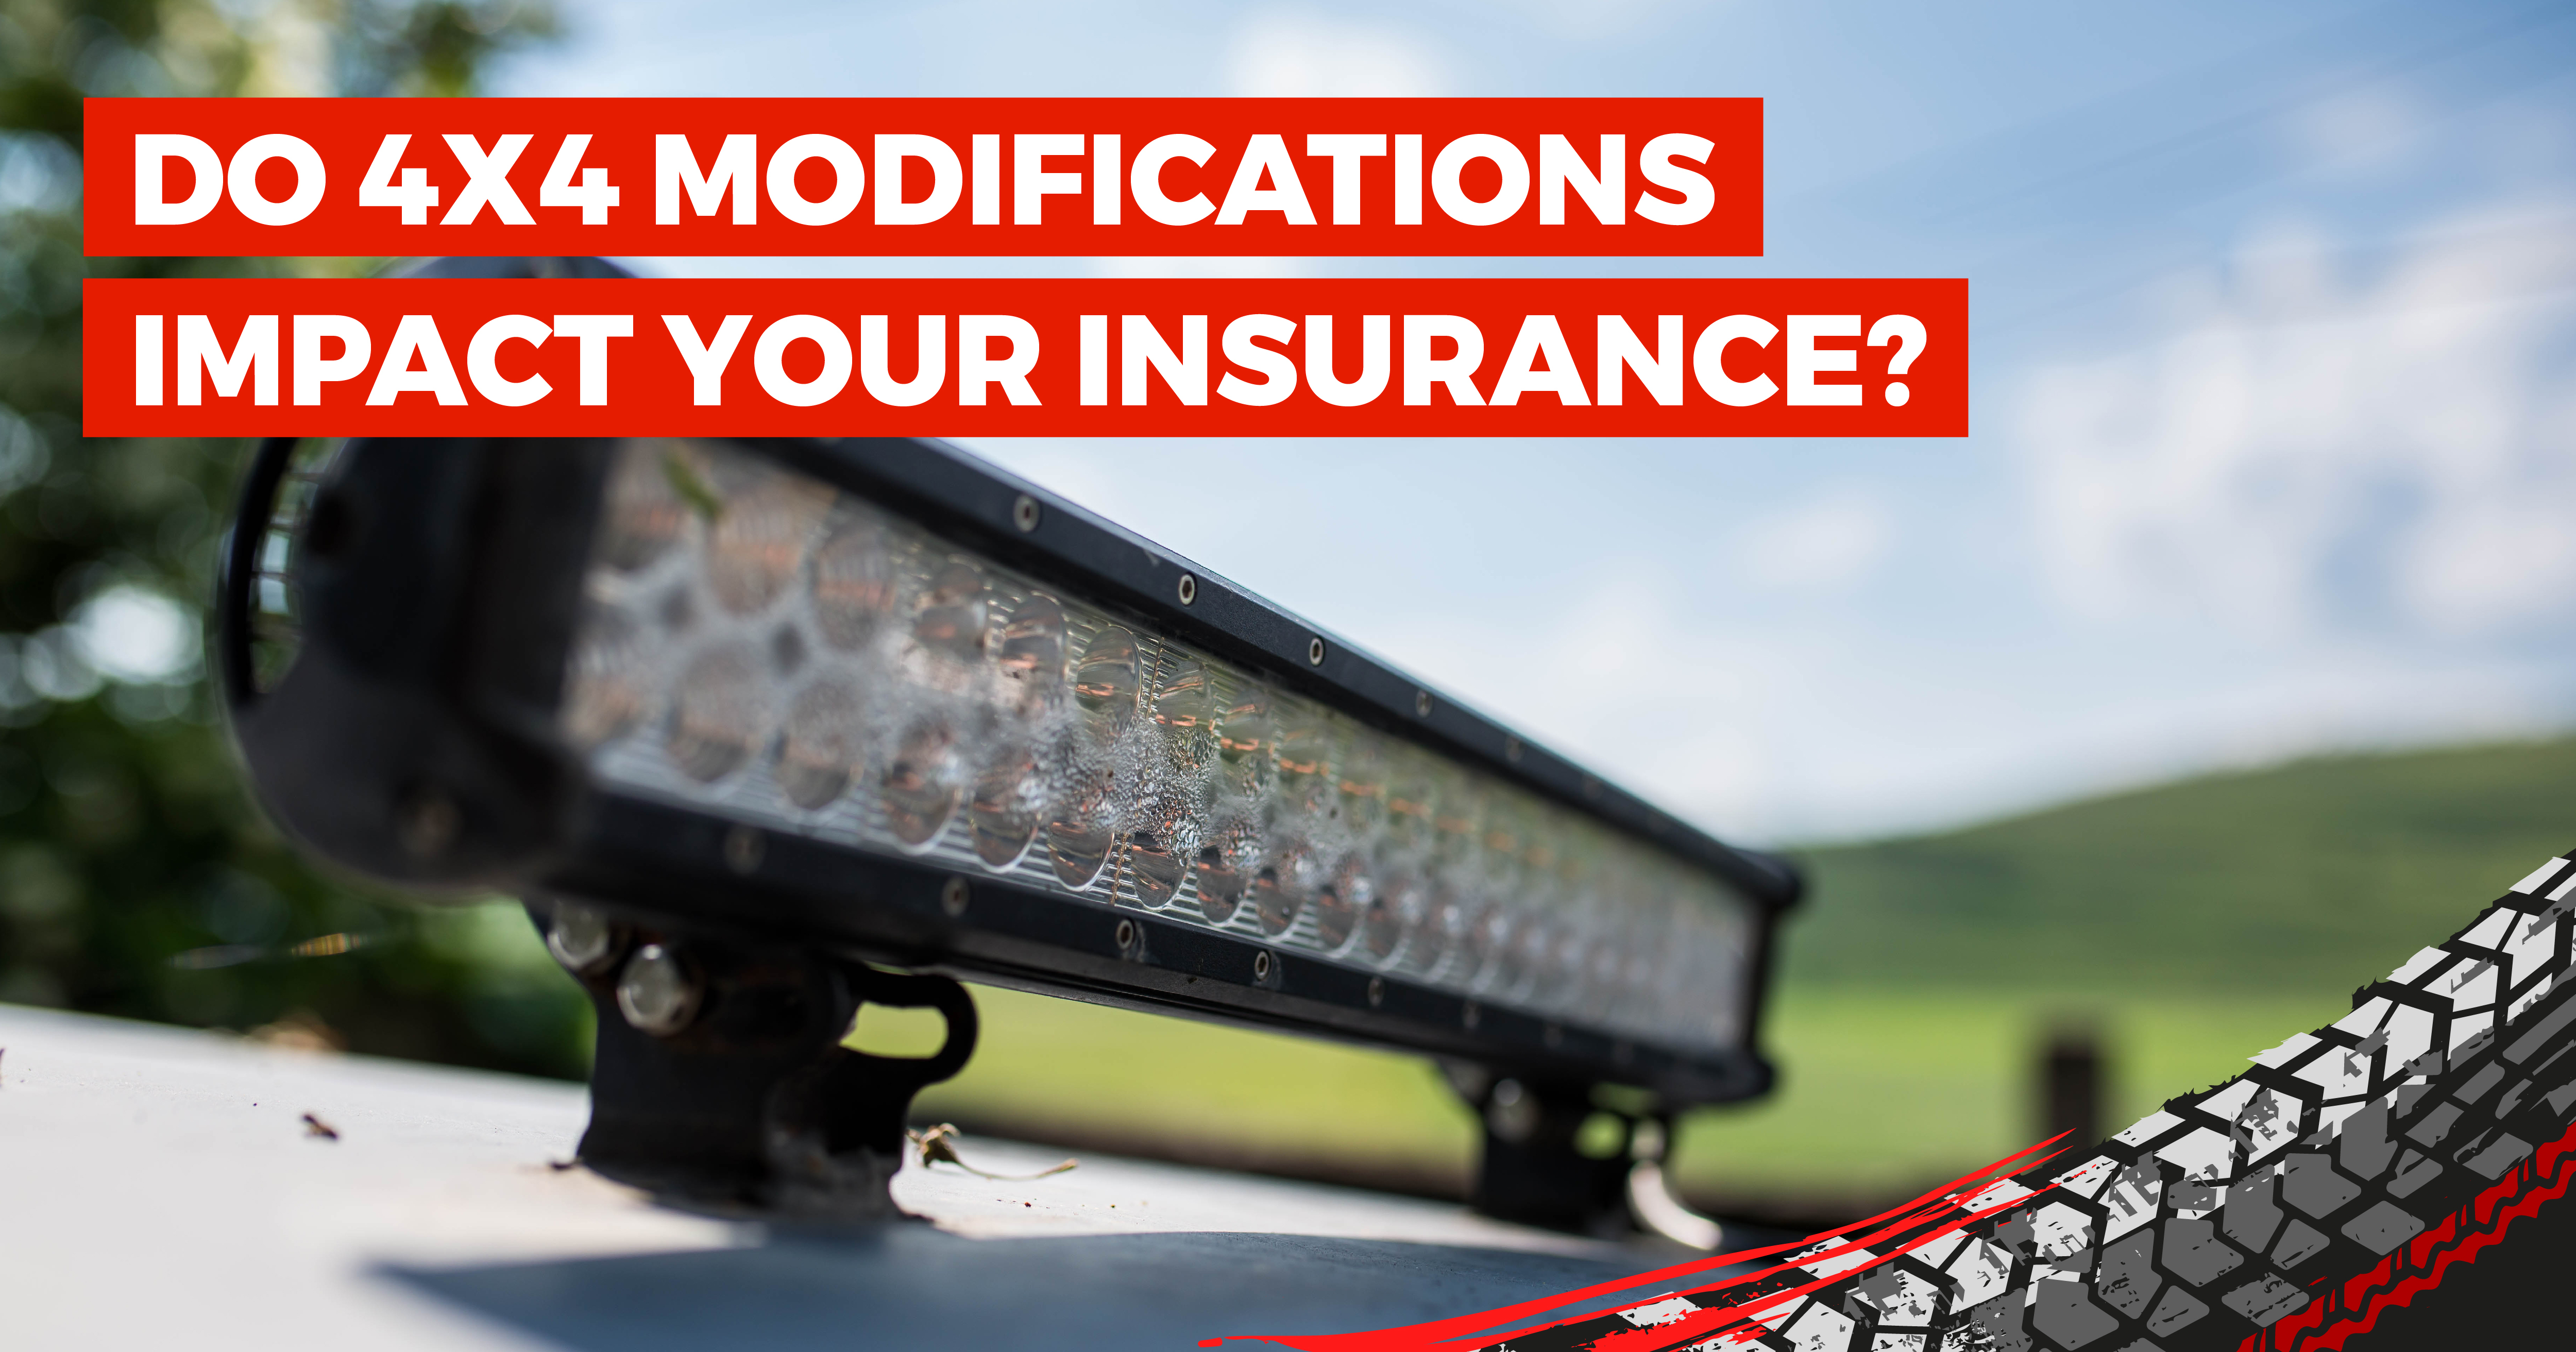 How Do 4x4 Modifications Impact Your Insurance?